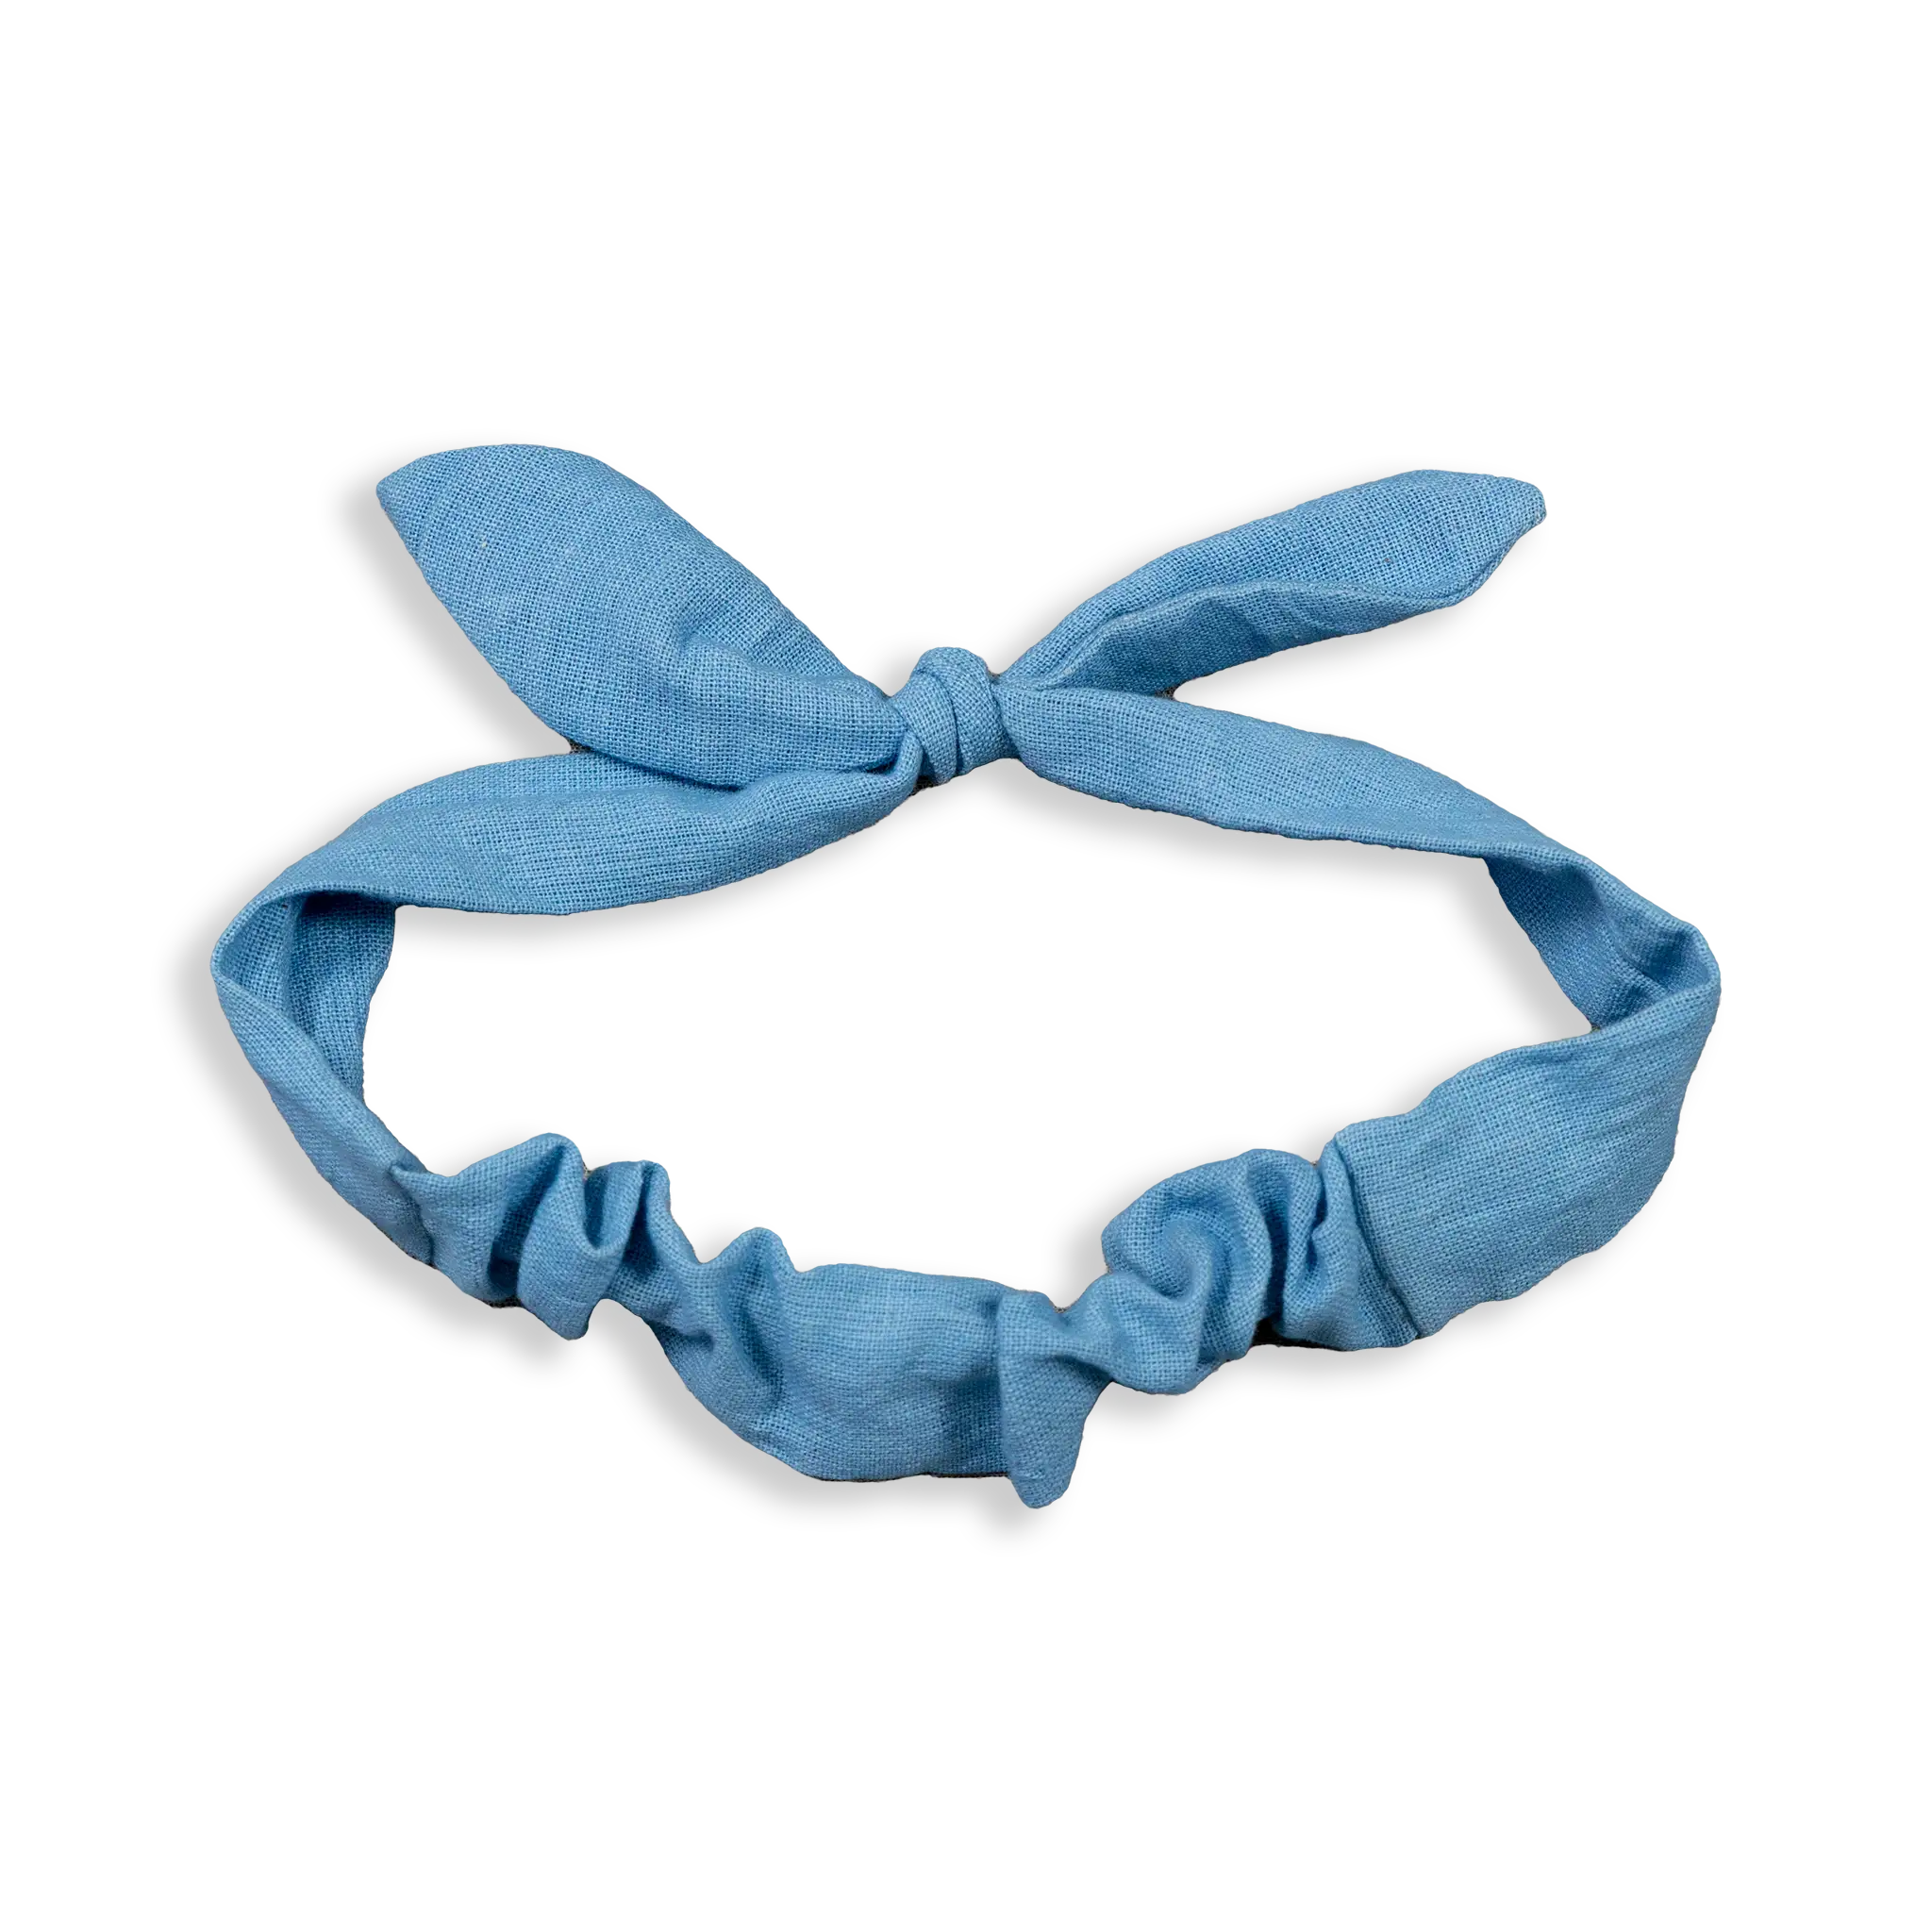 Our sweet little Headbands go with just about anything your child is wearing made from 100% cotton and in plain or striped variations.